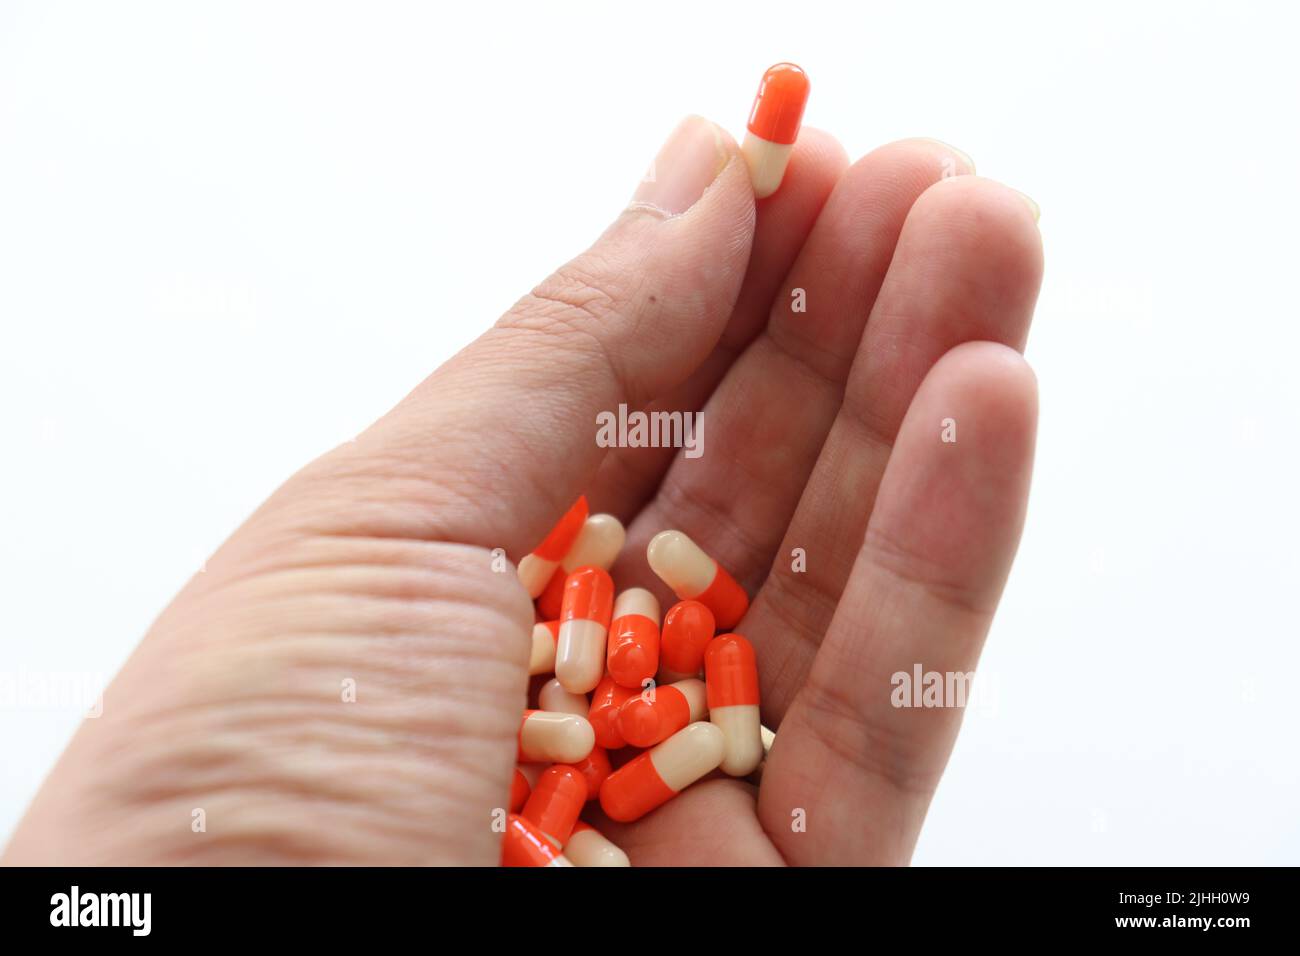 Medicine in hand. Patient committing suicide by overdosing on medication. Close up of overdose pills. Sad unhappy man holding medicine in palm. Stock Photo